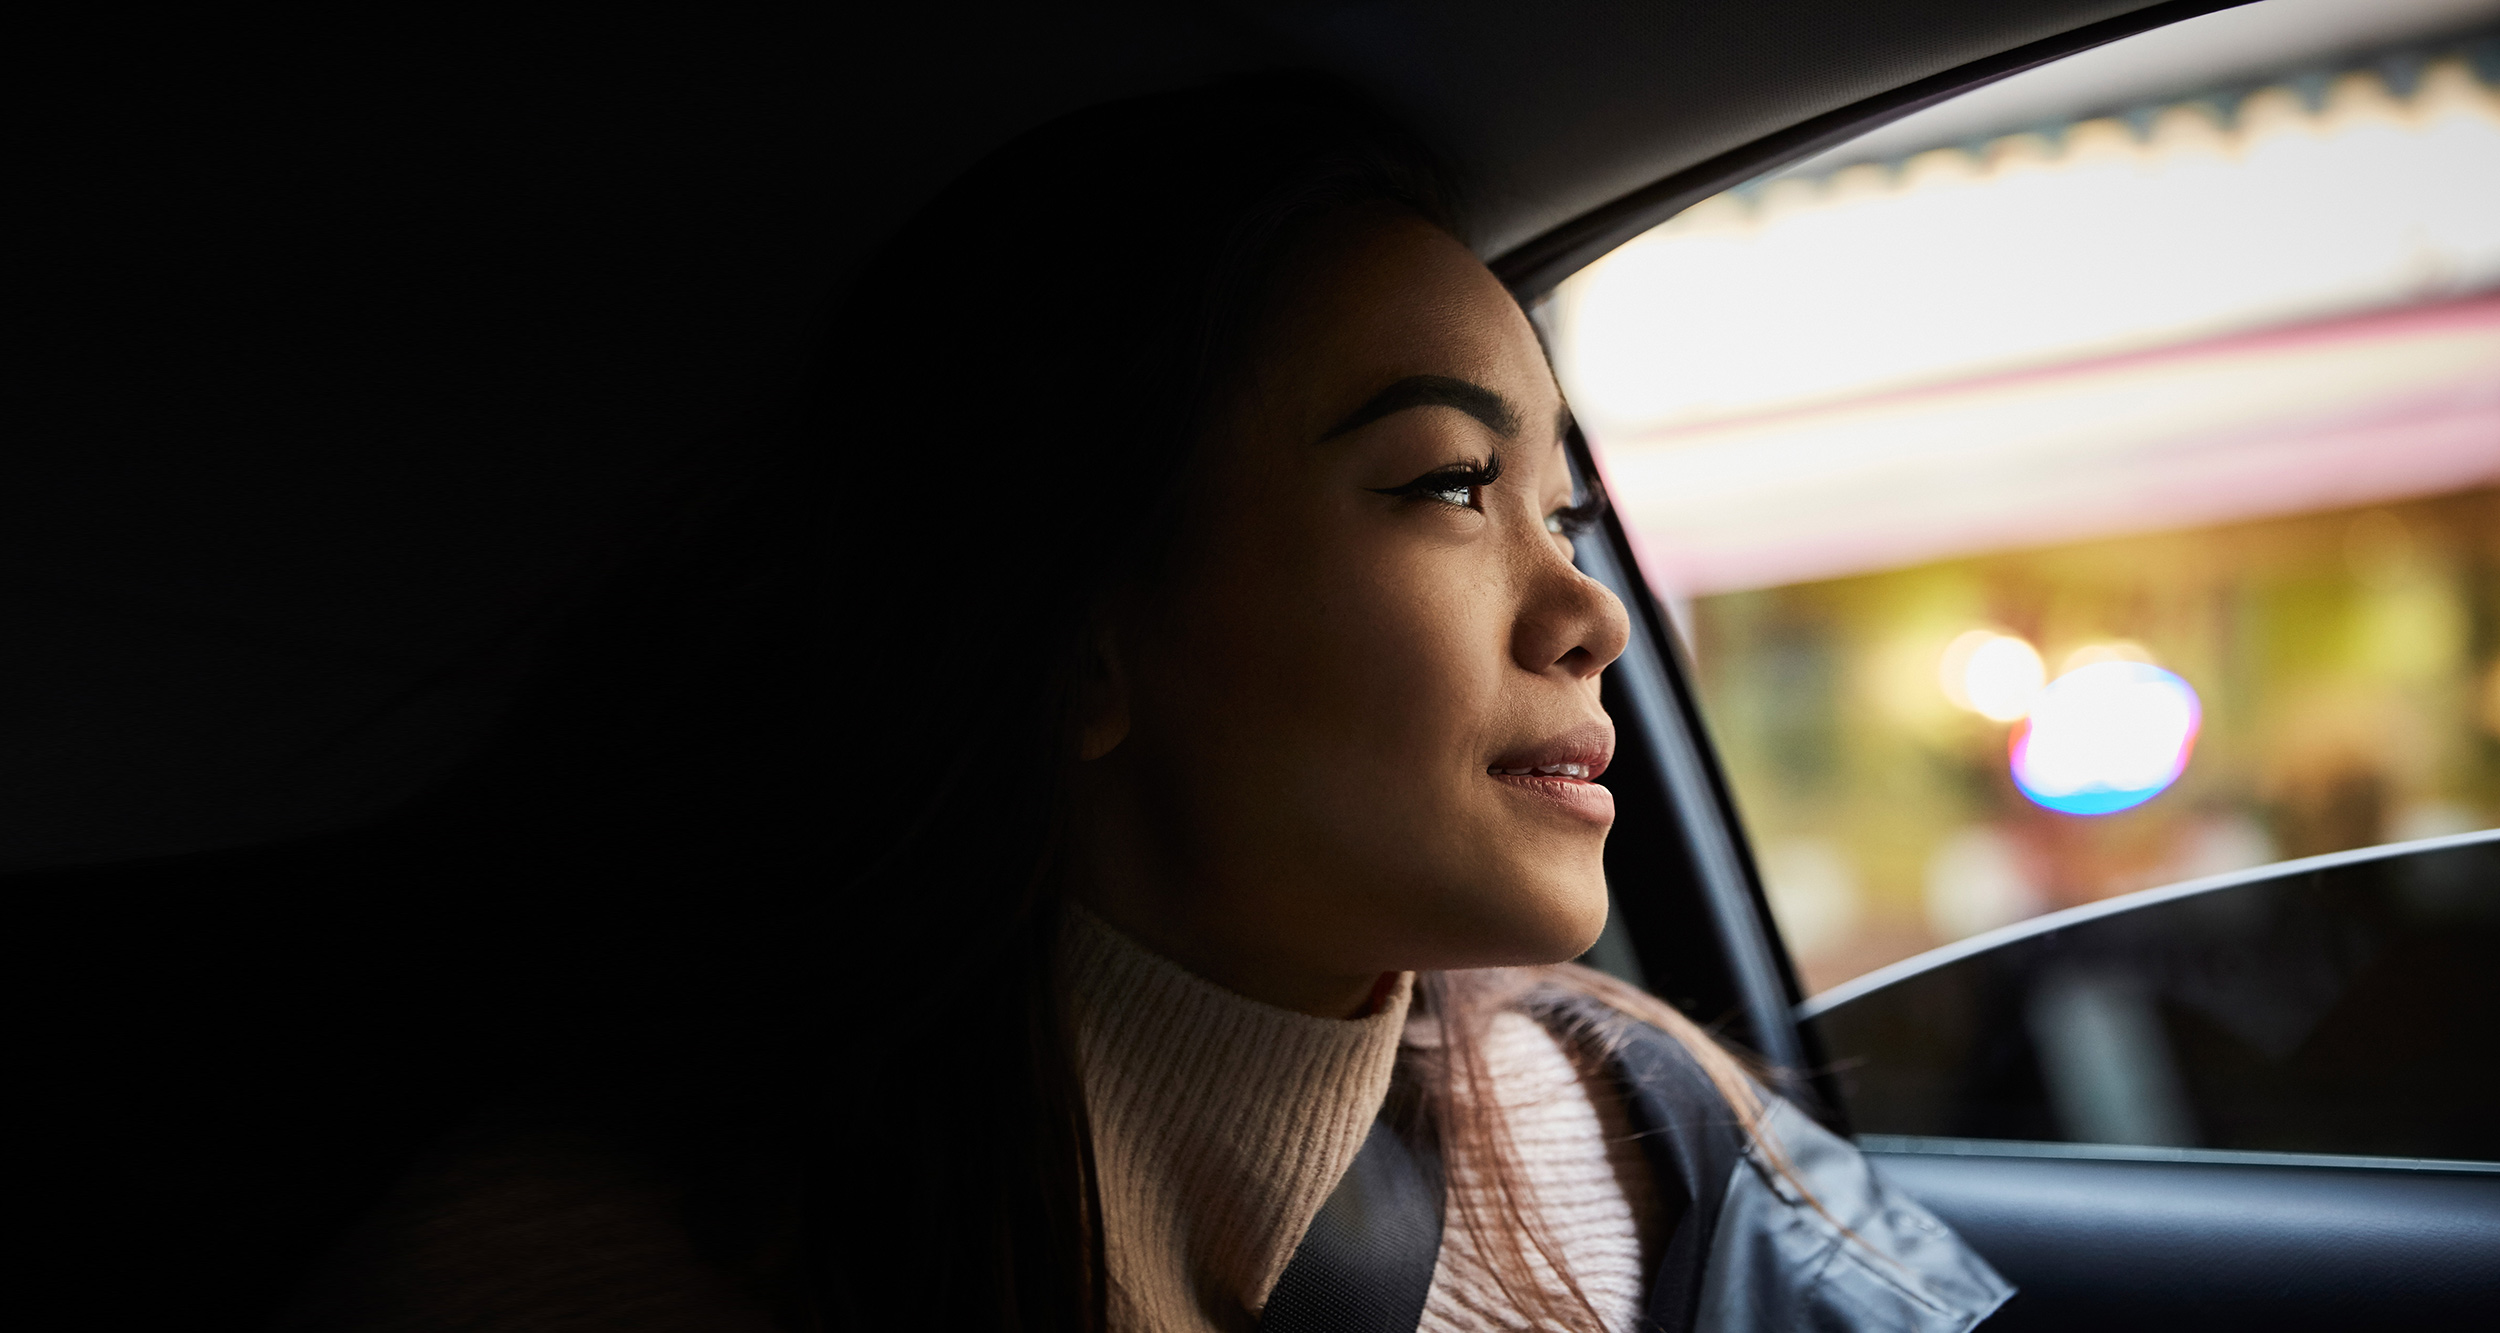 Woman in car staring out the window contemplatively